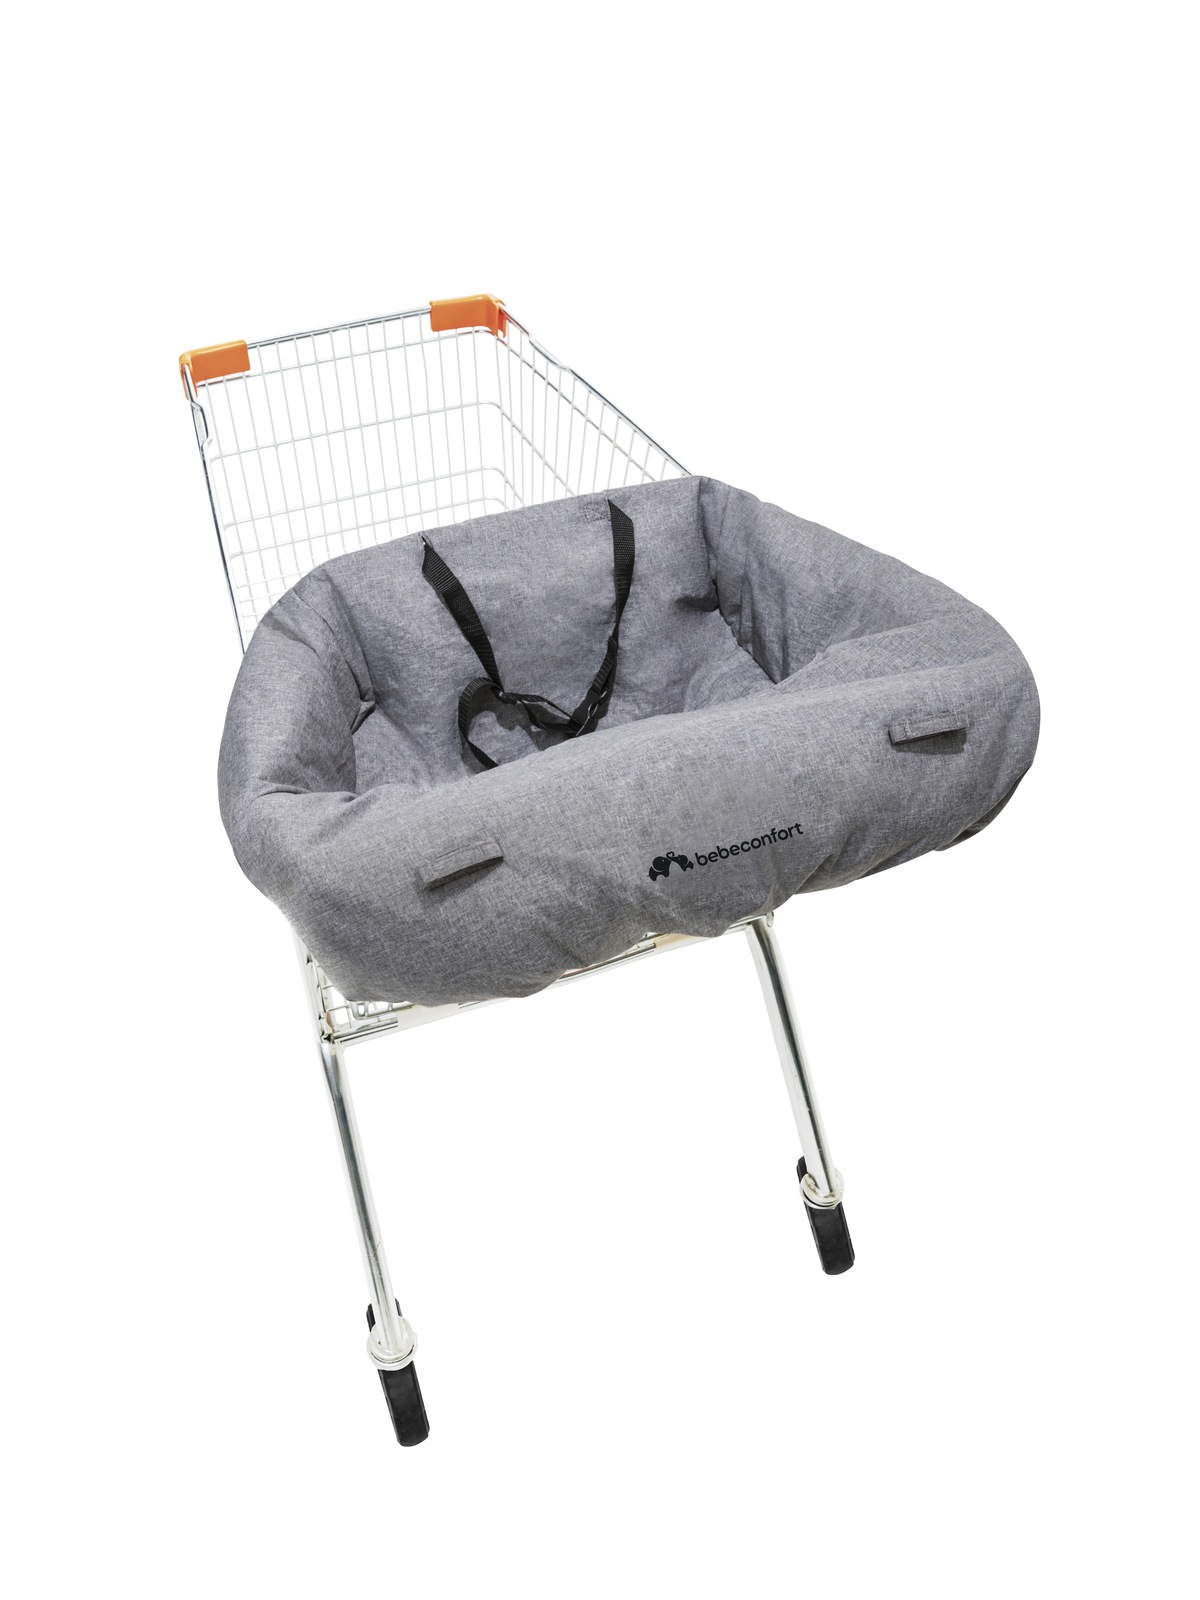 Shopping trolley protect black chic - BEBE CONFORT